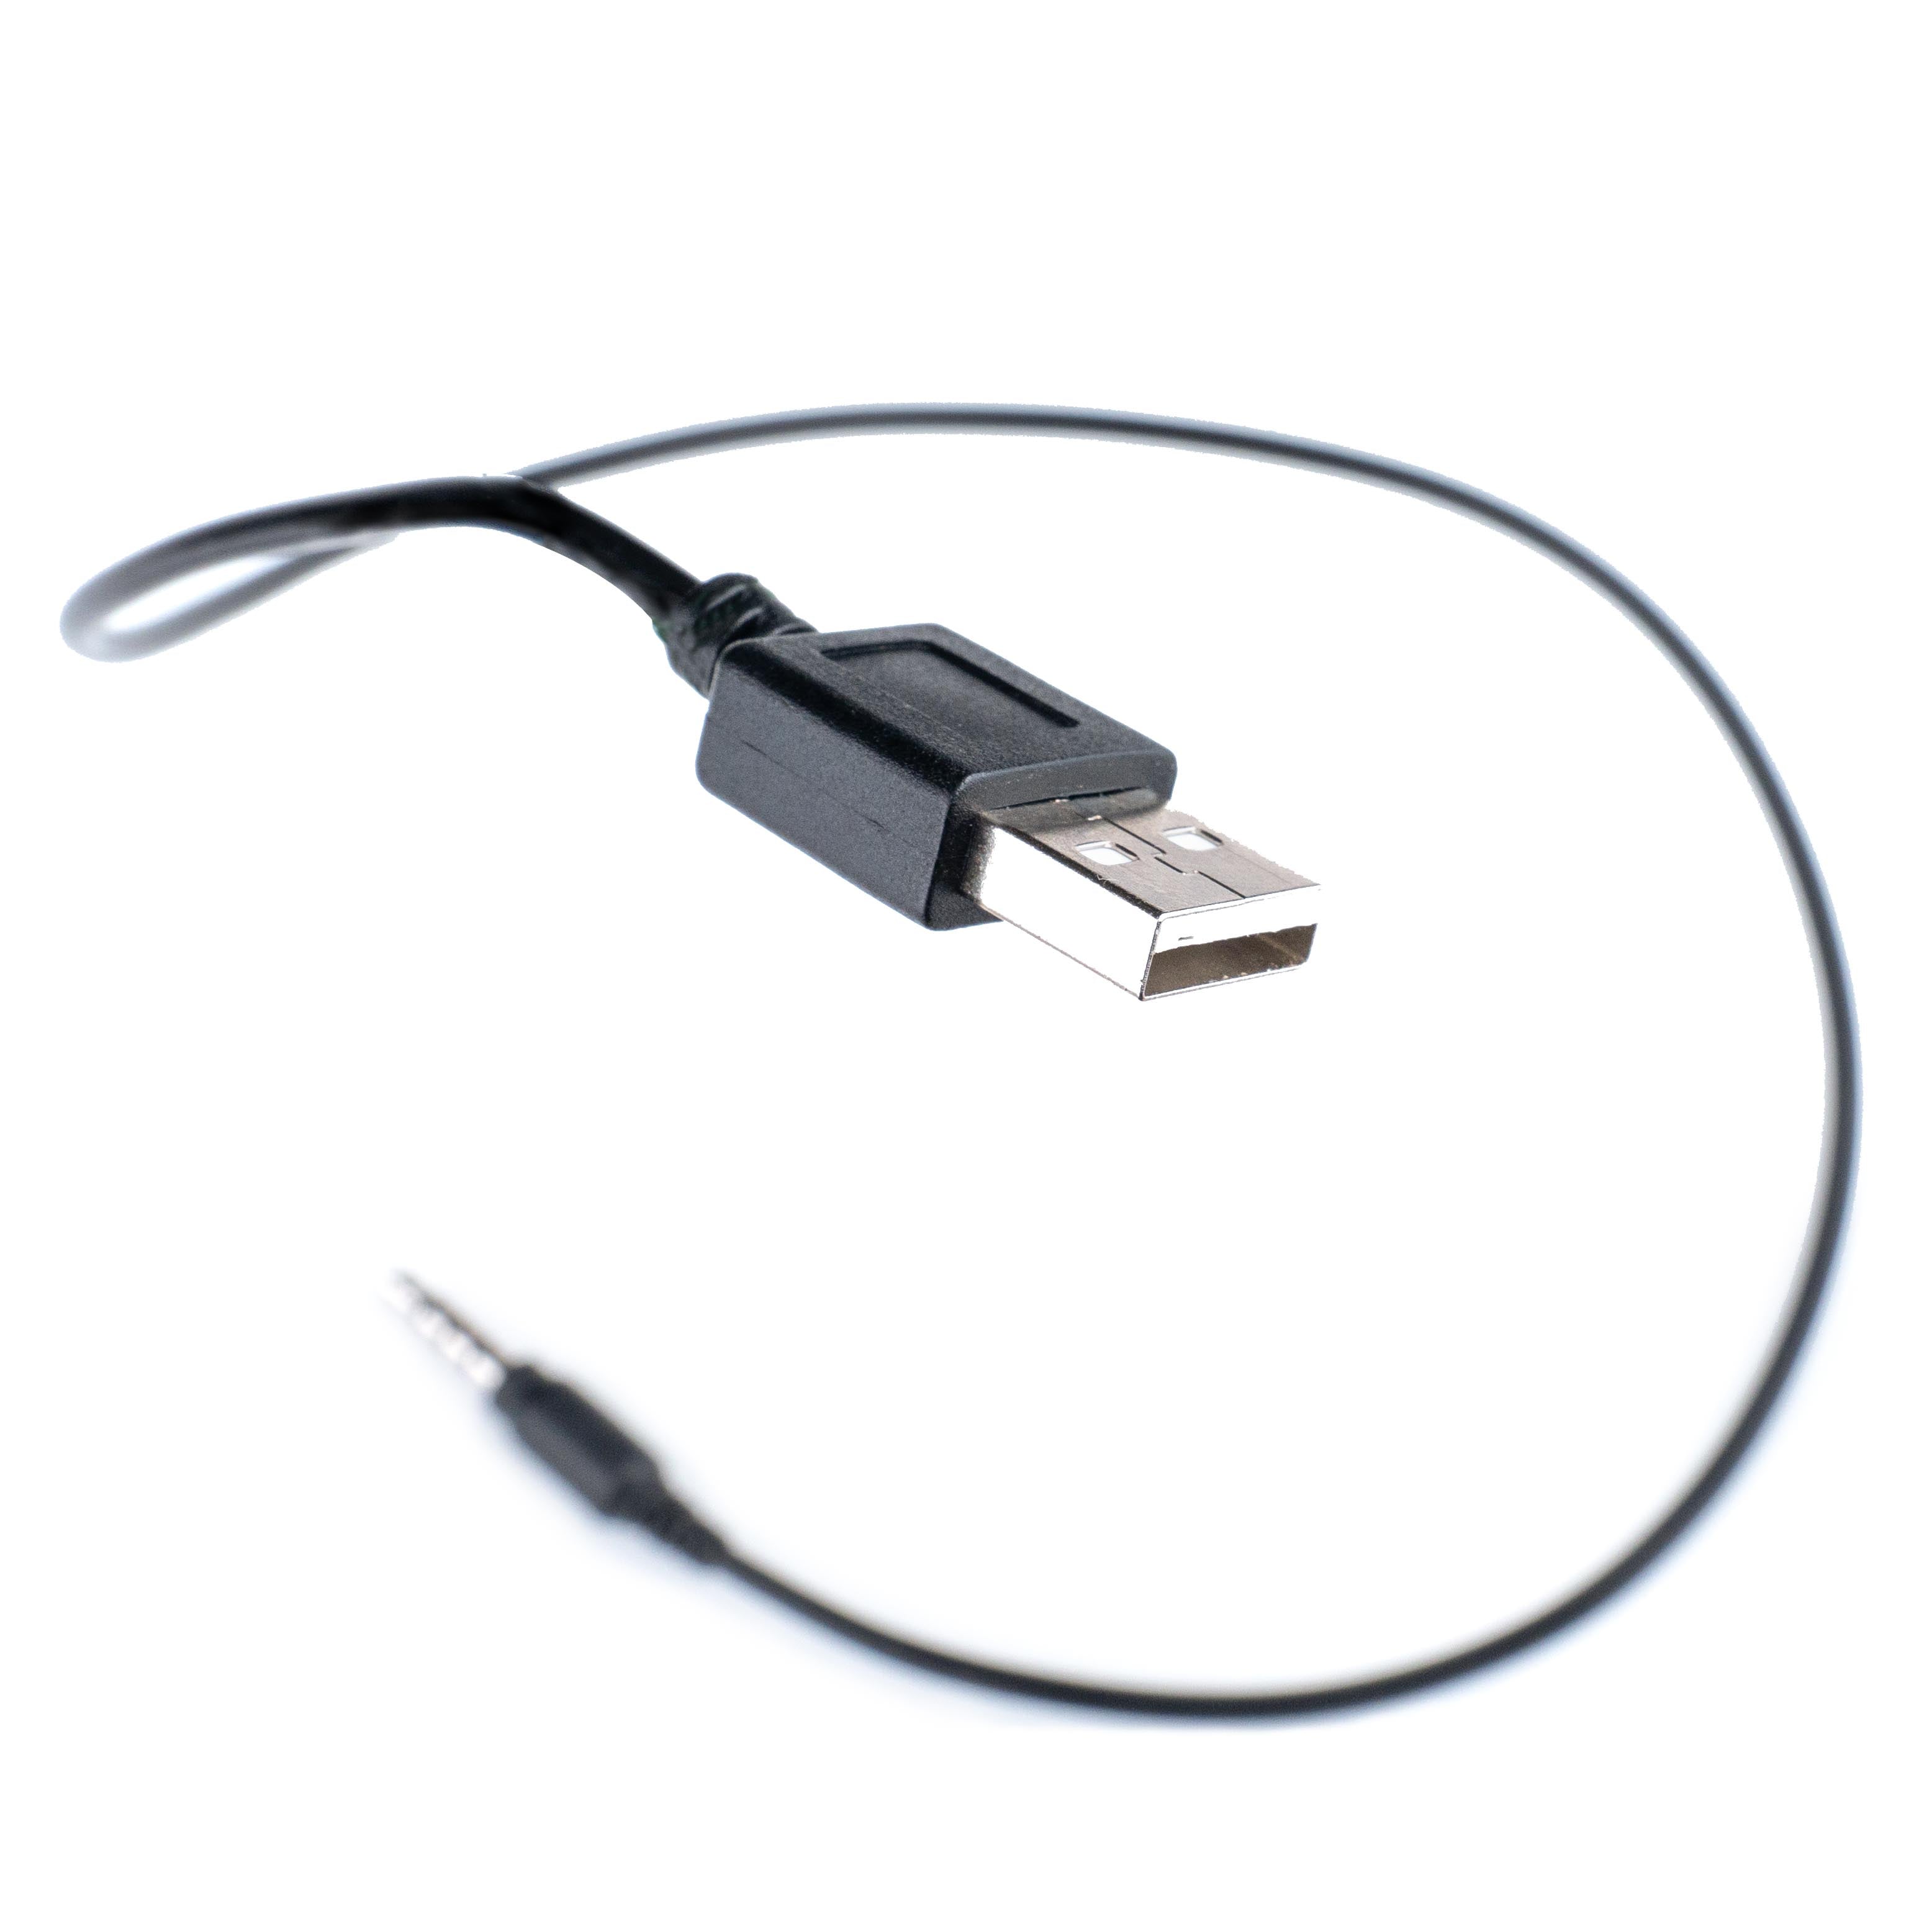 USB Charge & Sync Cord for Delphin Waterproof Micro Tablet